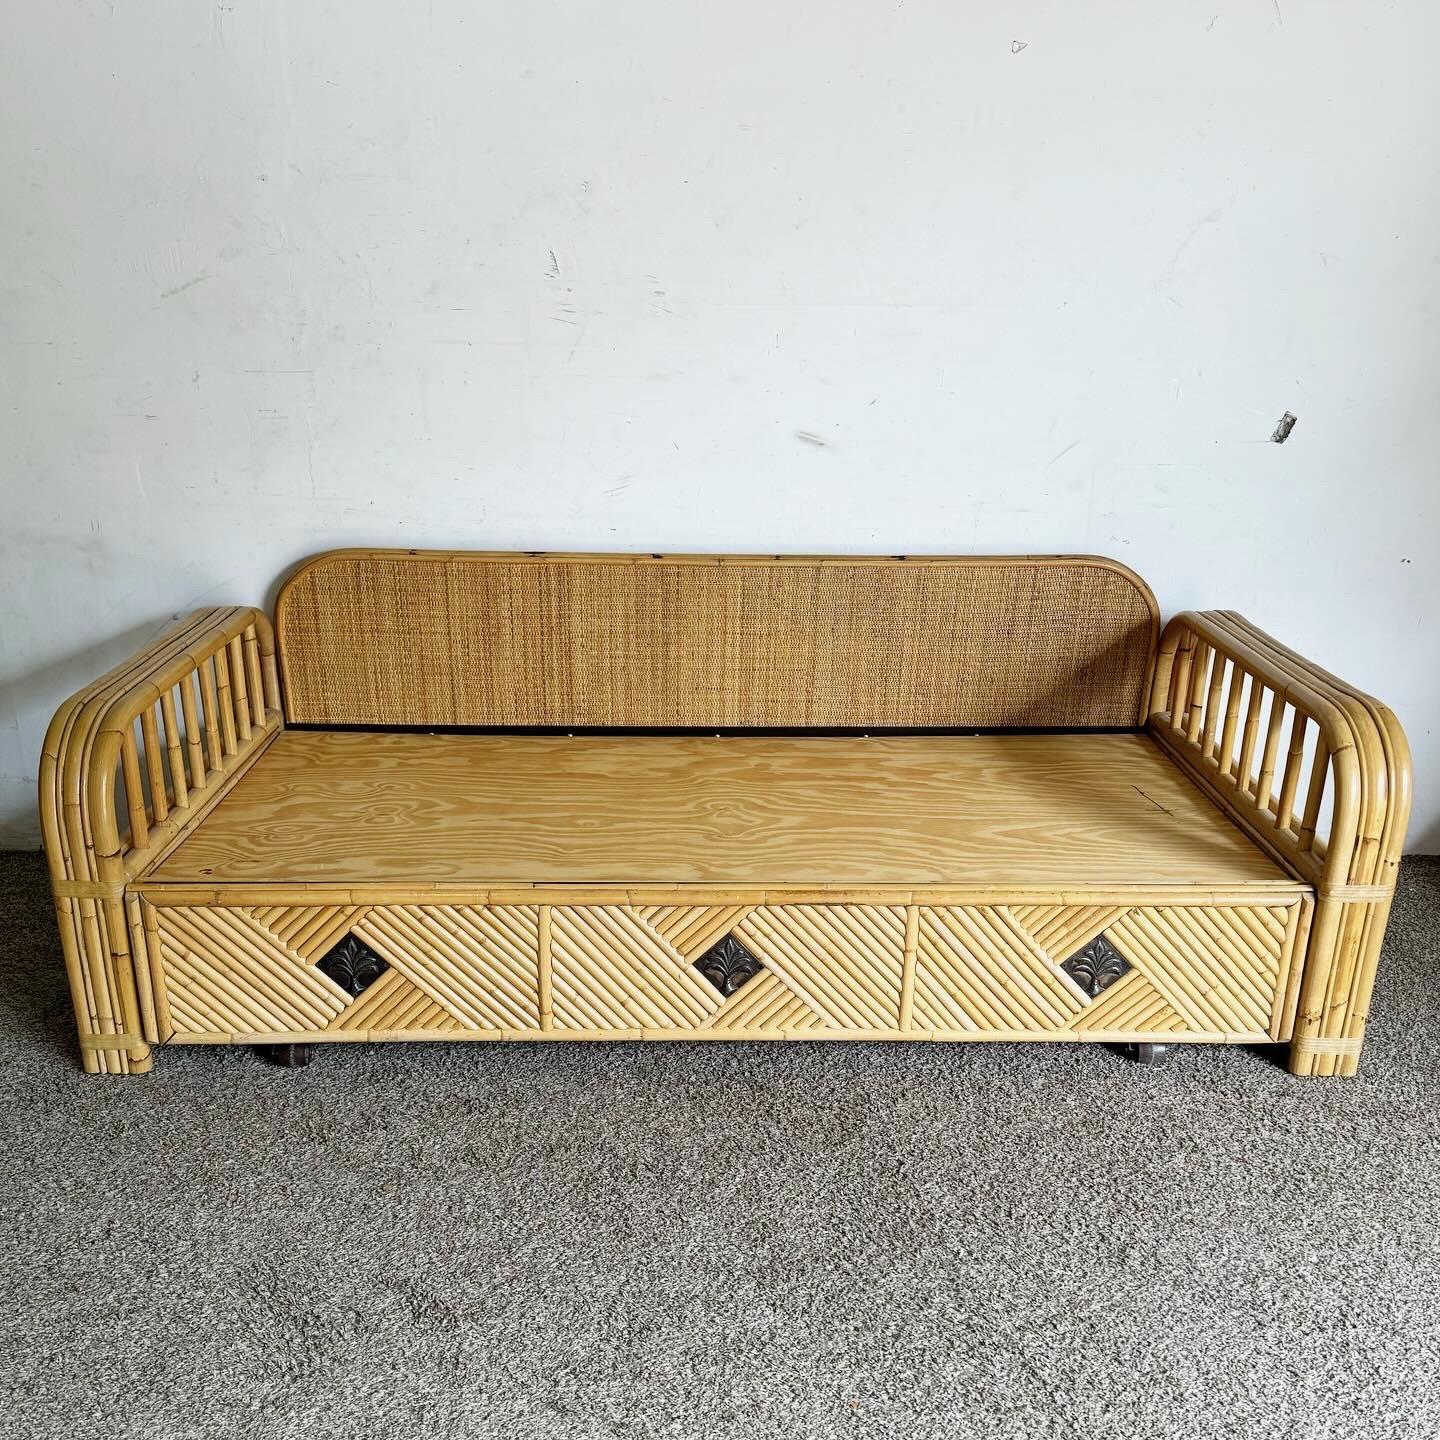 Boho Chic Bamboo Rattan Day Bed With Pull Out Trundle For Sale 2